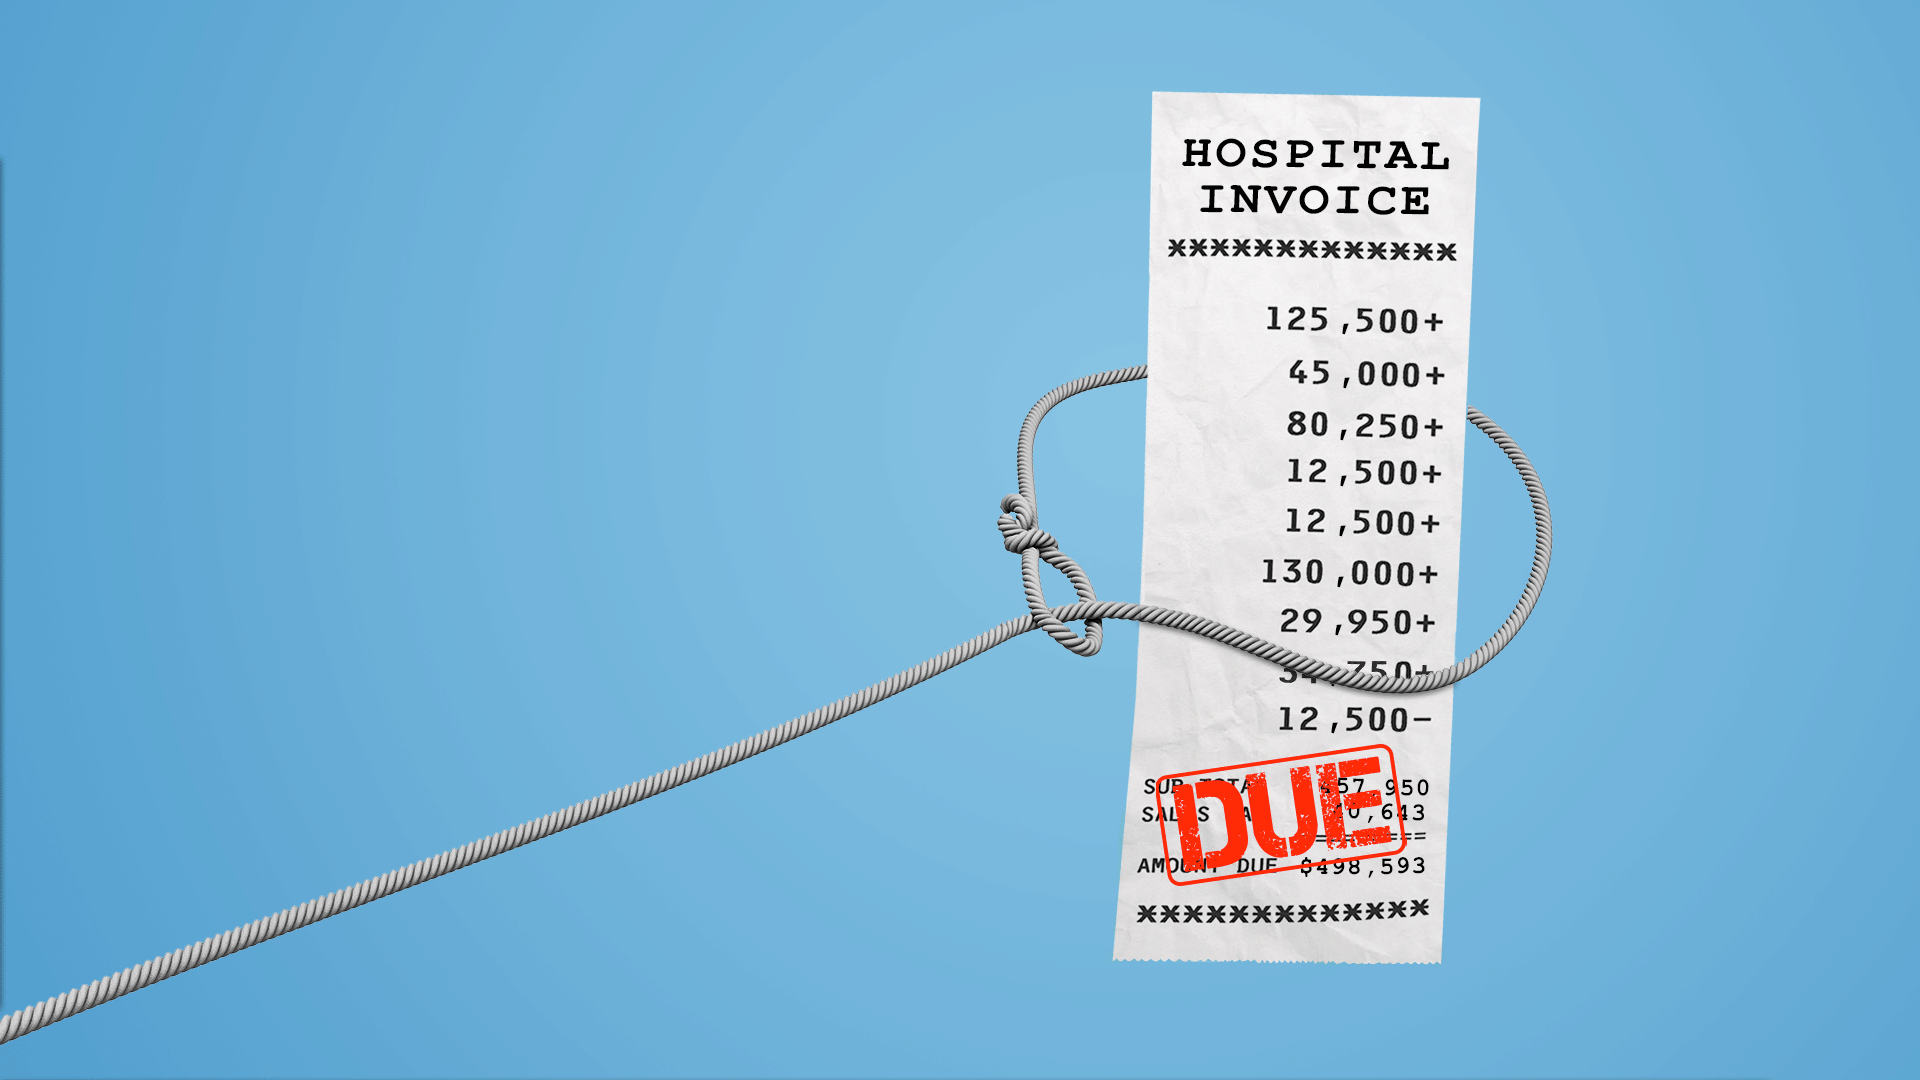 In this illustration, a lasso is pictured around a hospital a bill with a large INVOICE at the bottom of it.